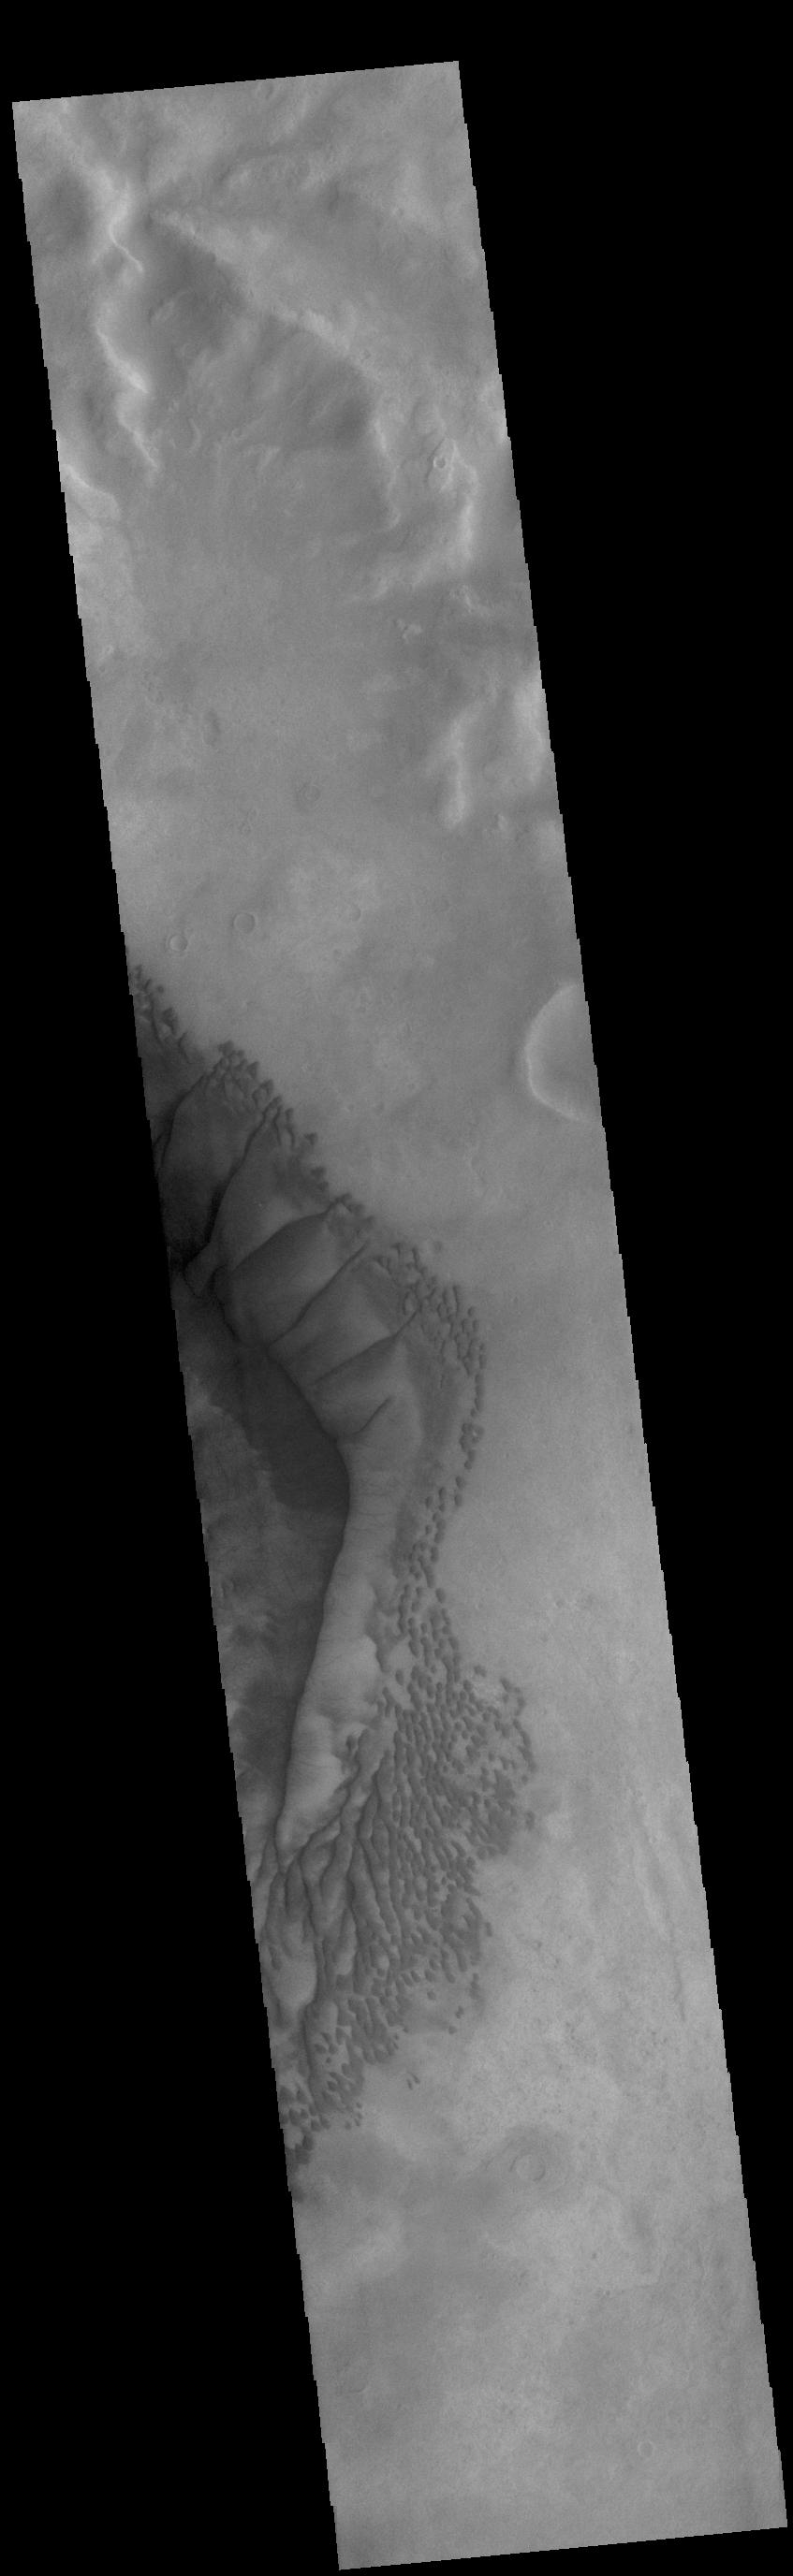 PIA24159: Russell Crater Dunes